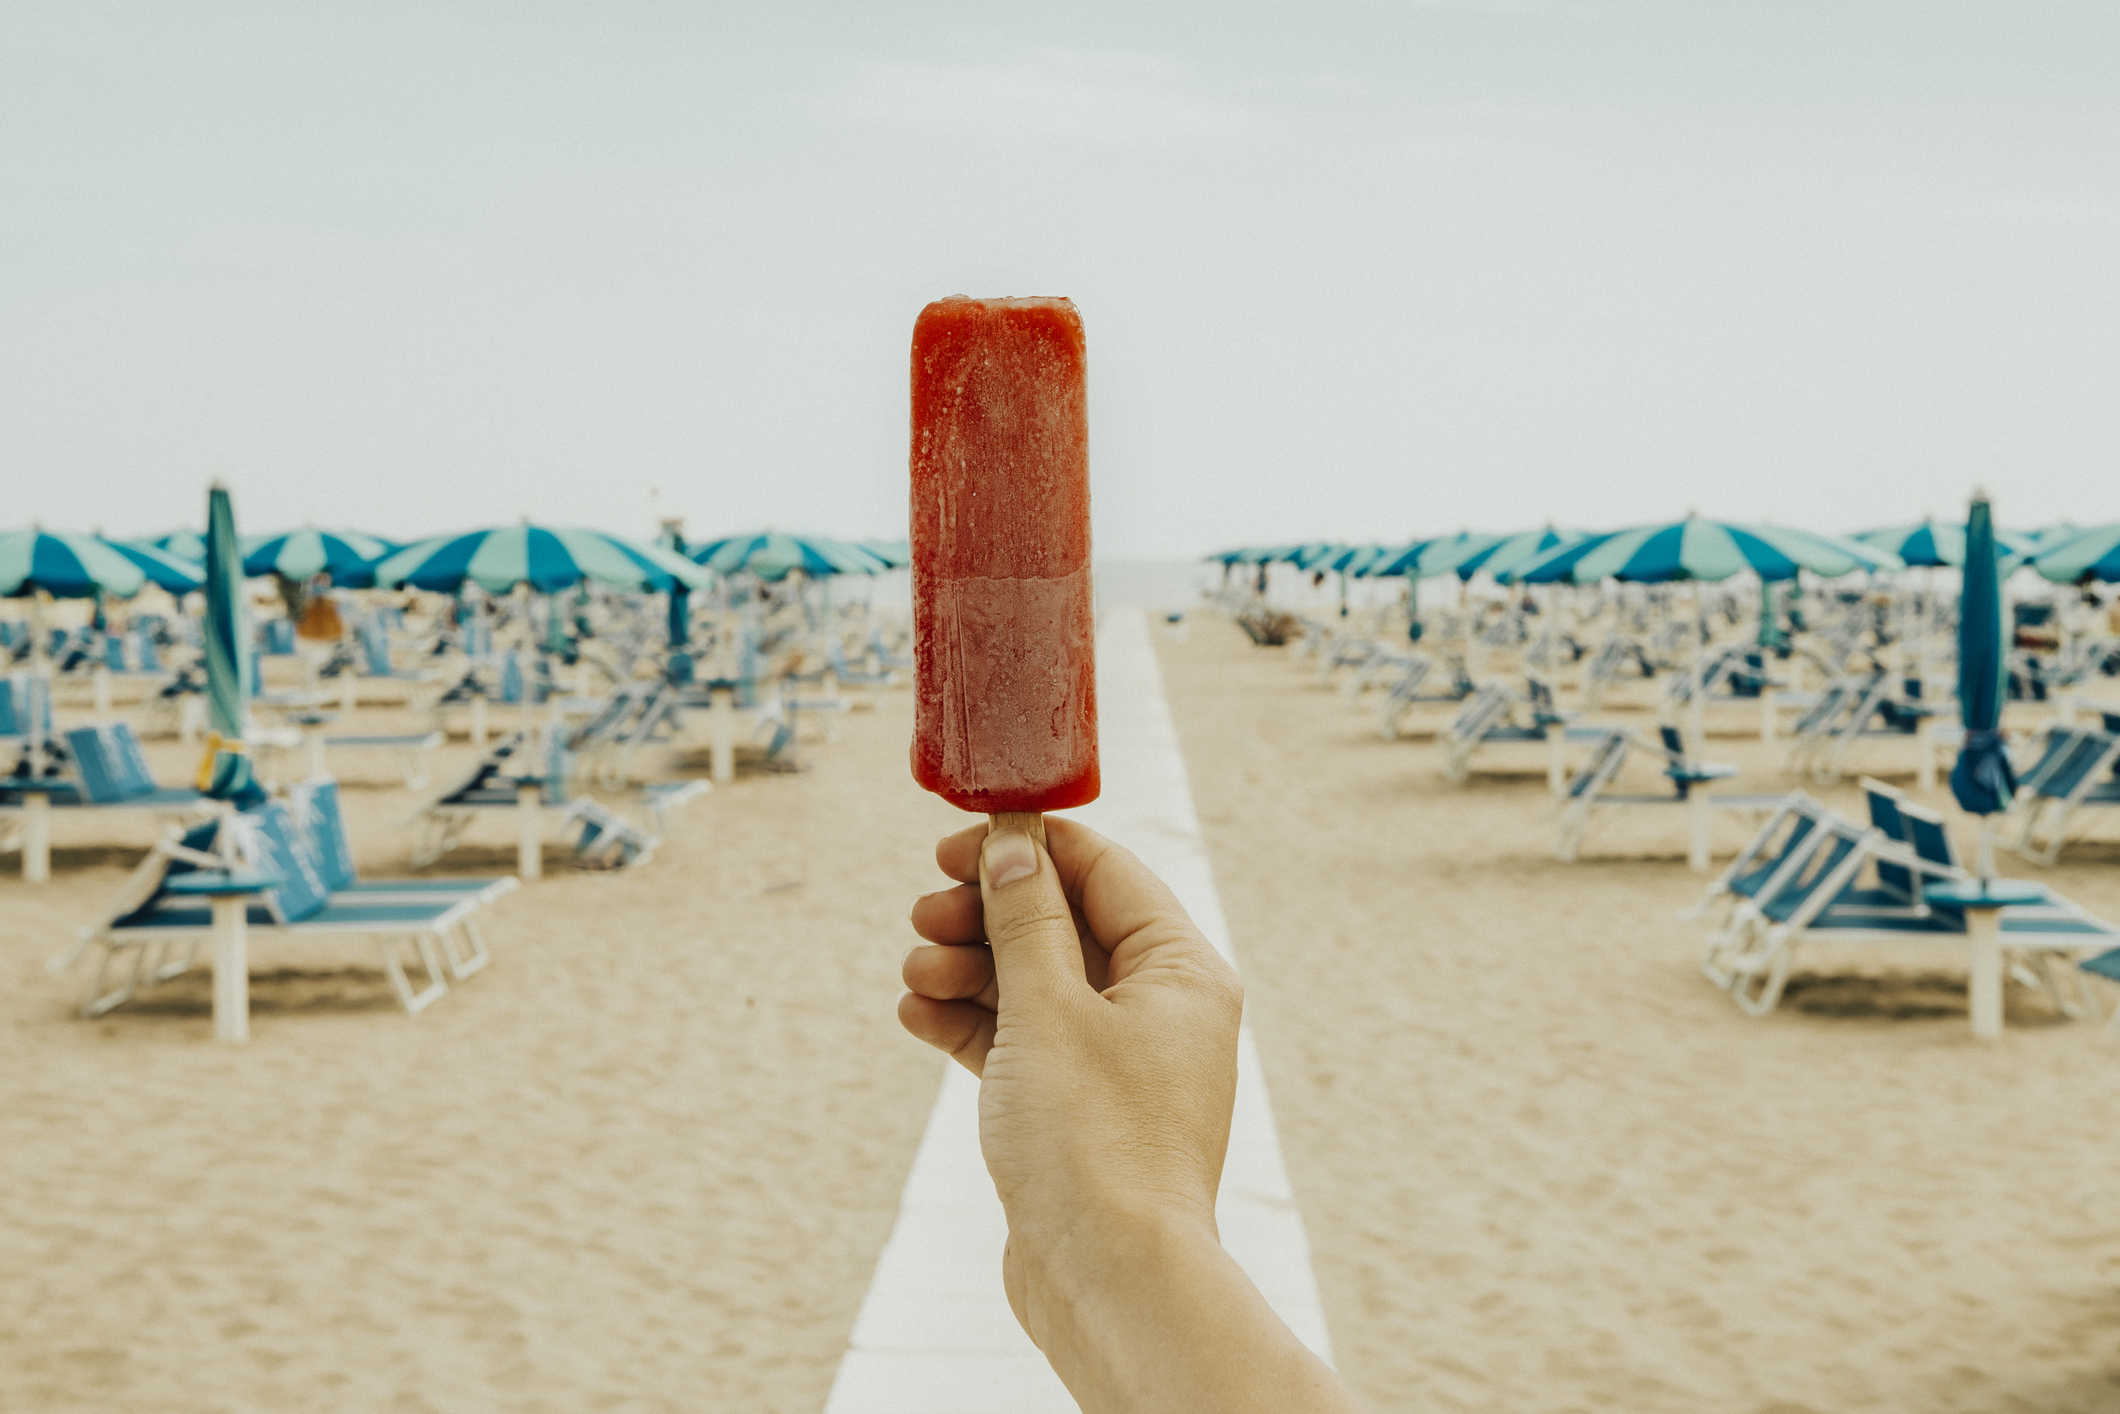 Holding up a popsicle against a beach backdrop filled with lounge chairs and umbrellas